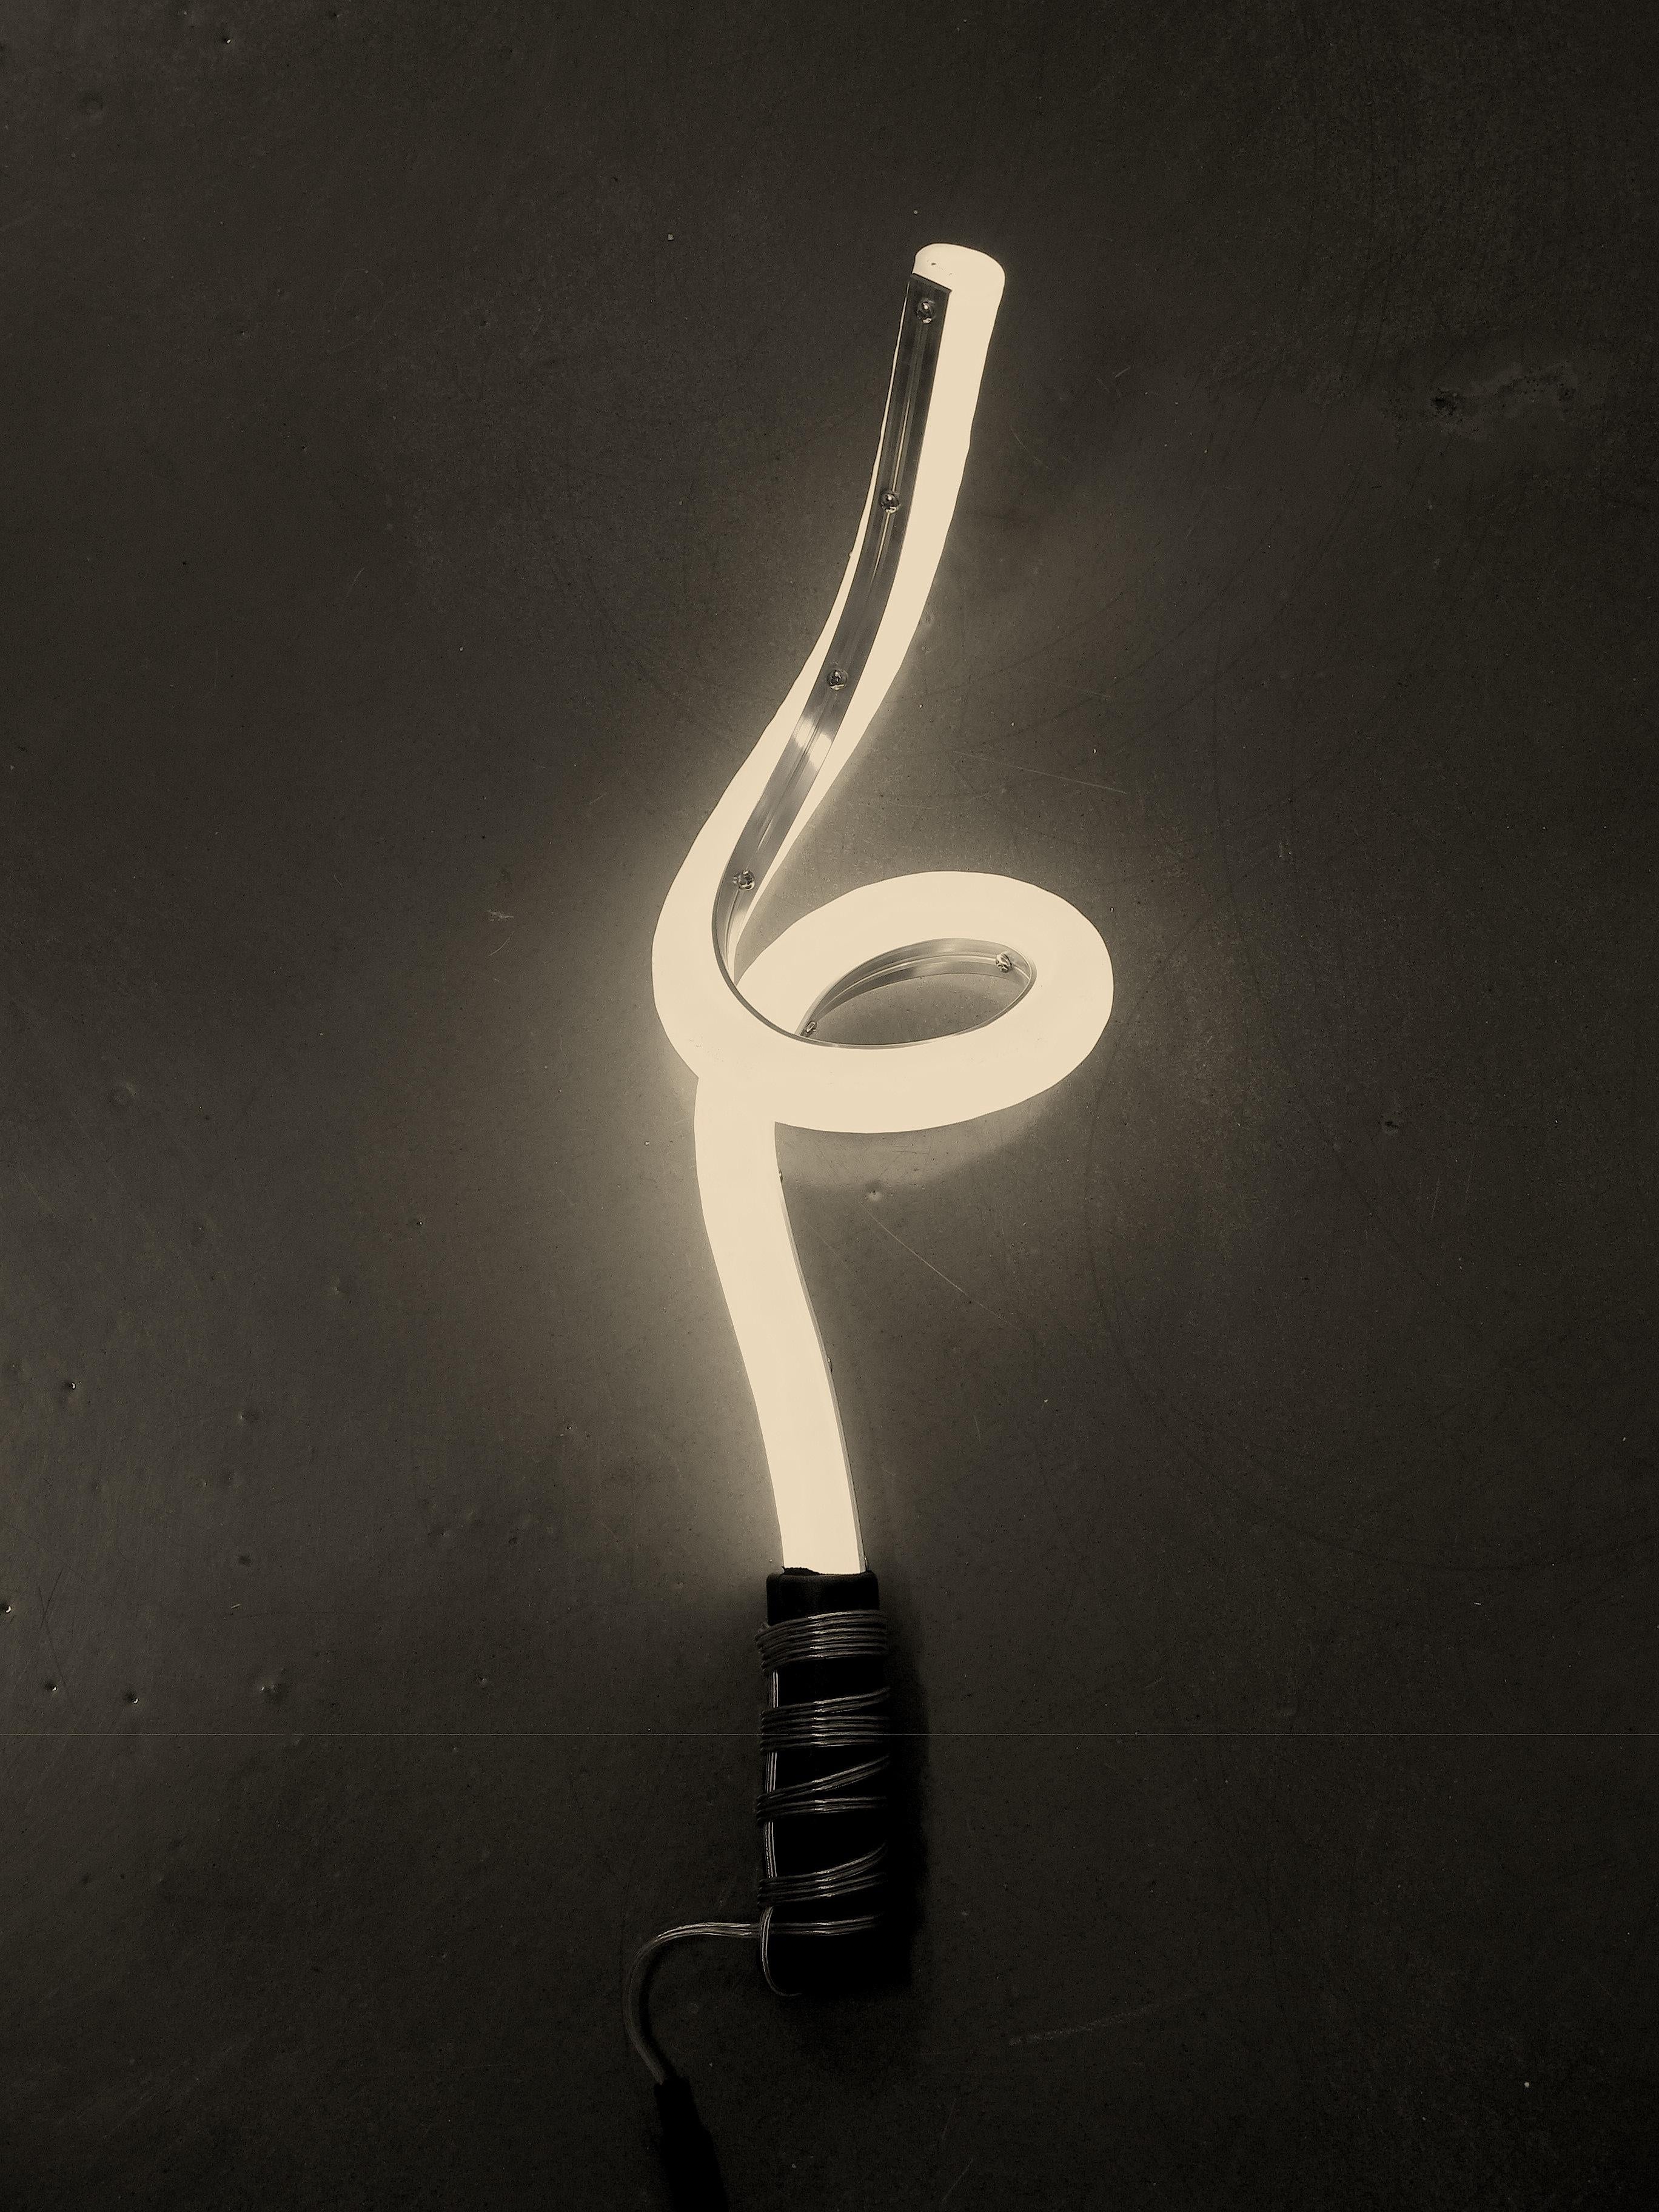 Small light edition by german light artist Susanne Rottenbacher
also available in red, blue and pink

Title: Licht im Griff
2021
LED-light Tube (warm white), bicycle handle, aluminium, Ed.9/25
48 x 14 x 15 cm

